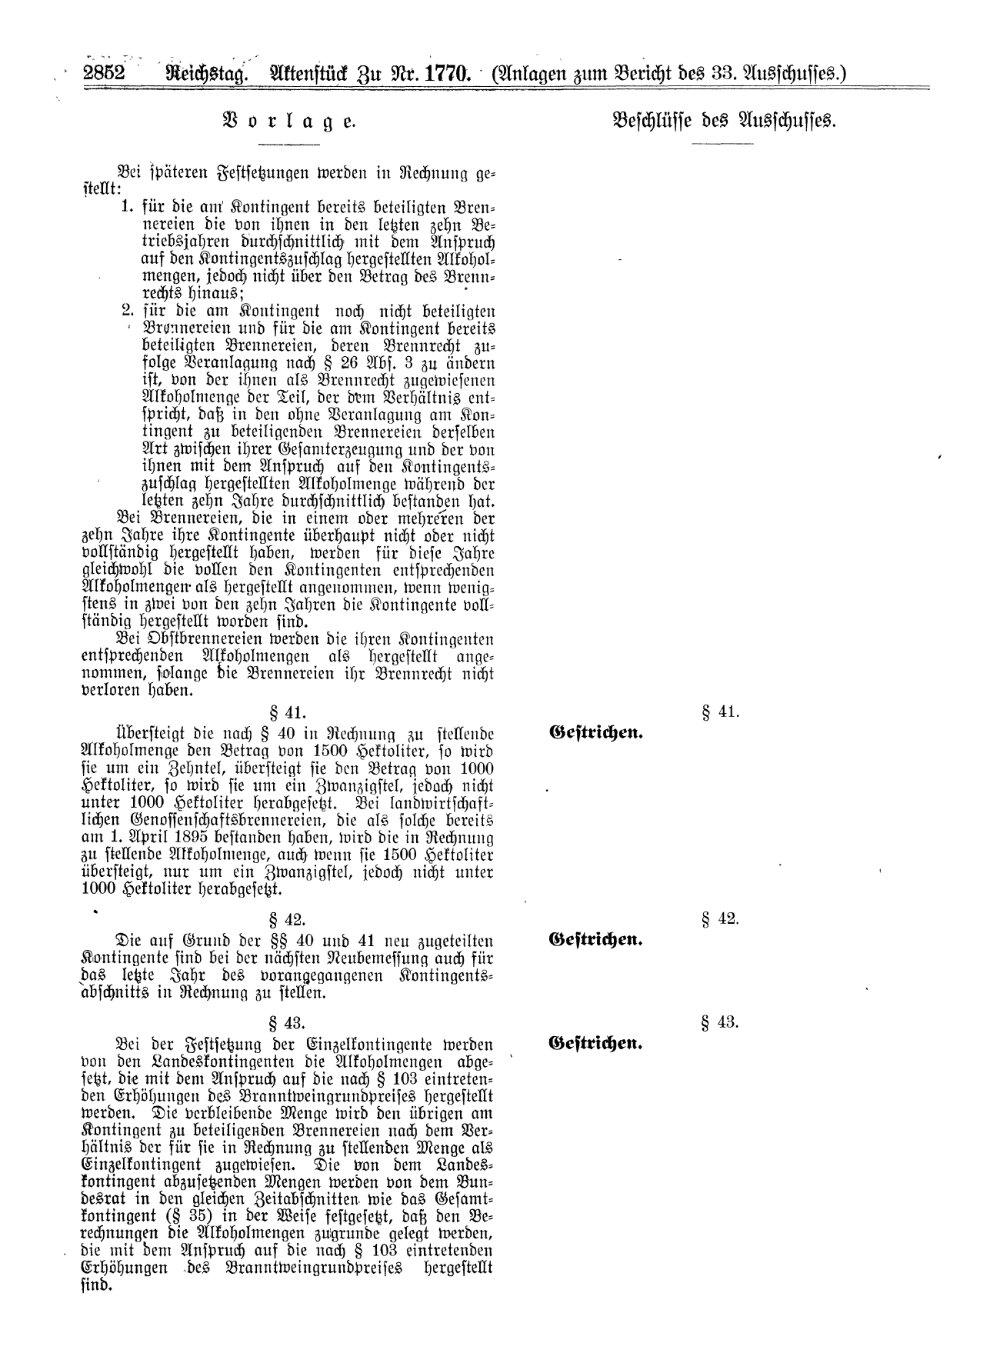 Scan of page 2852